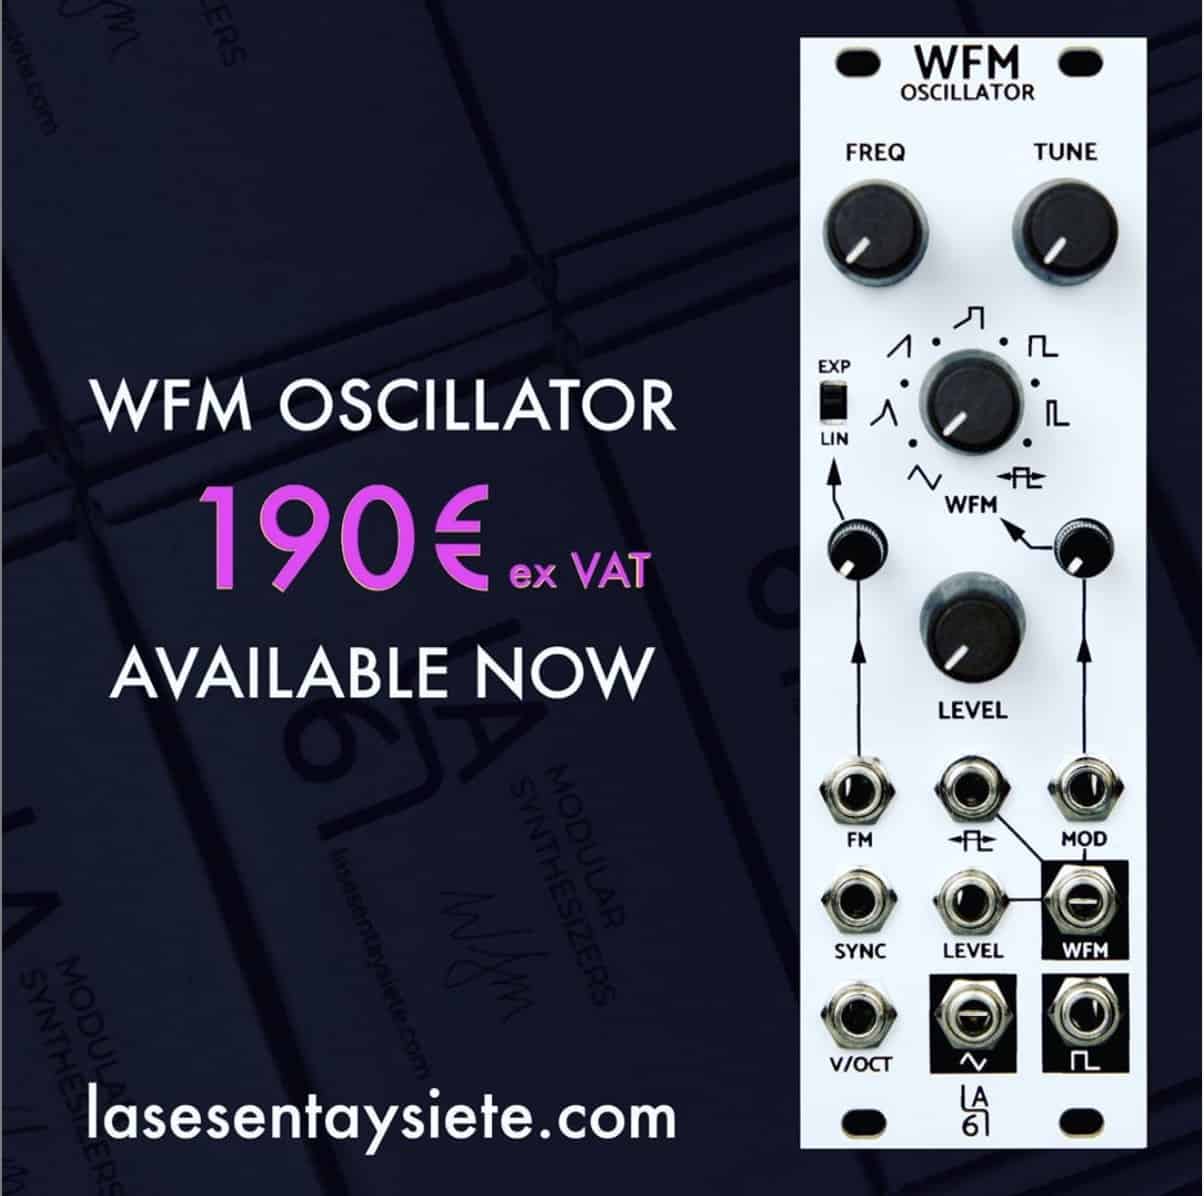 WFM-Oscillator-is-now-available-from-dealers-in-the-La-67-webshop